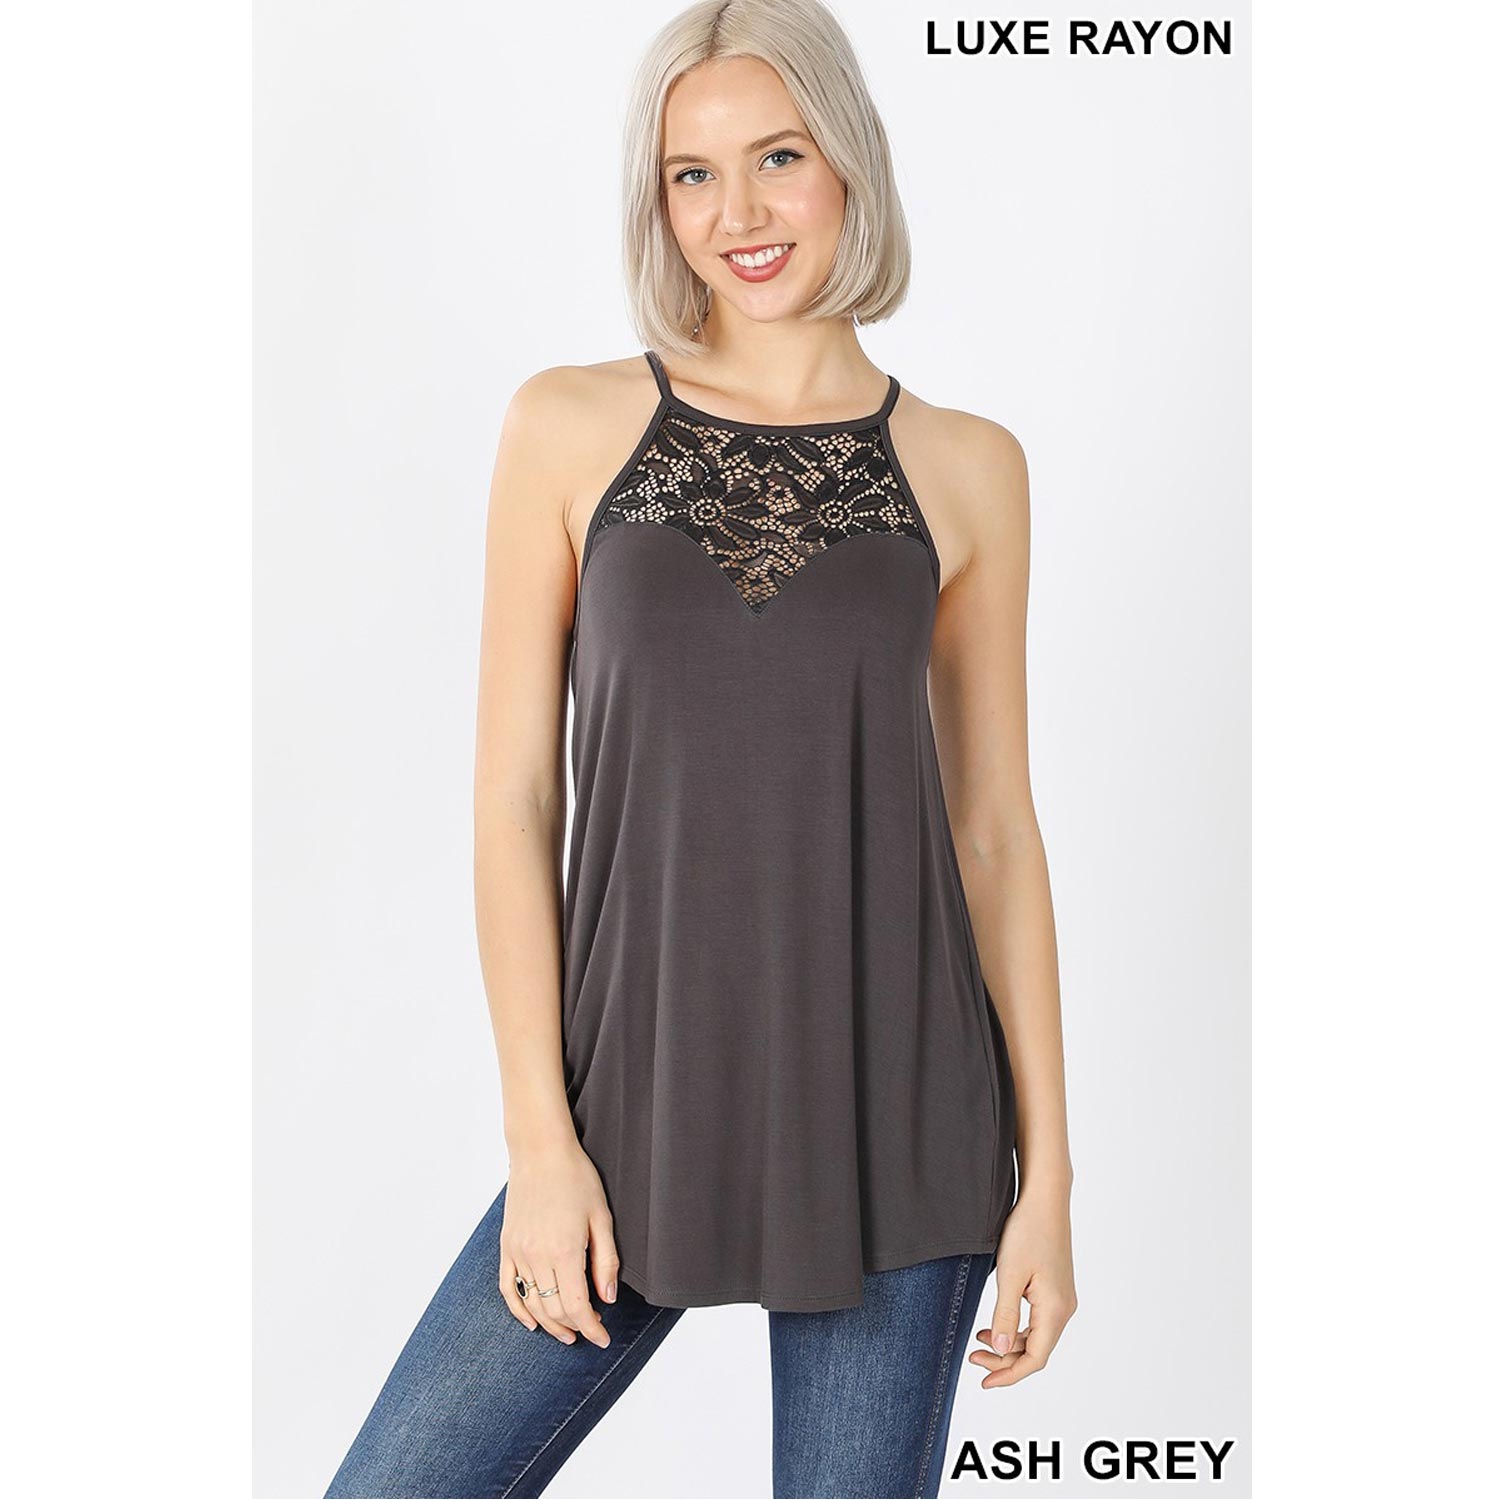 Buy One Get One Free Luxe Rayon Lace Paneled Sleeveless High Halter Top